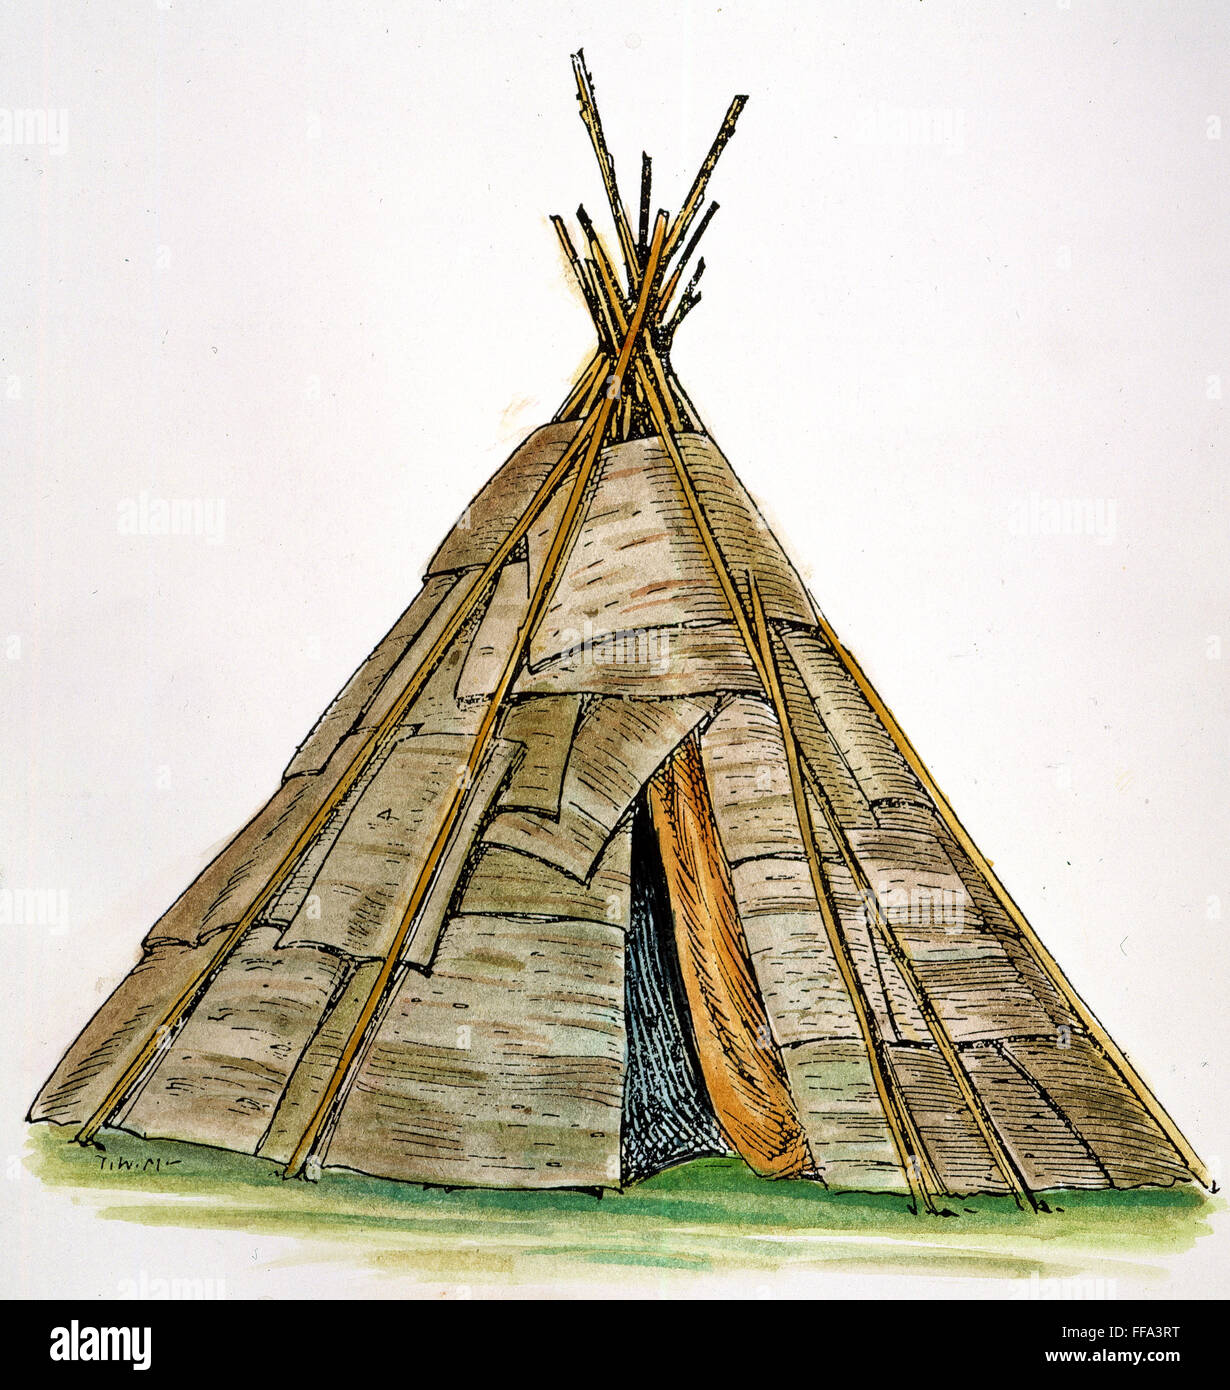 NATIVE AMERICAN WIGWAM. /nThe conical wigwam of the Ojibwa Native Americans, consisting of a framework of poles covered with sheets of birch bark. Drawing by C.W. Jefferys. Stock Photo